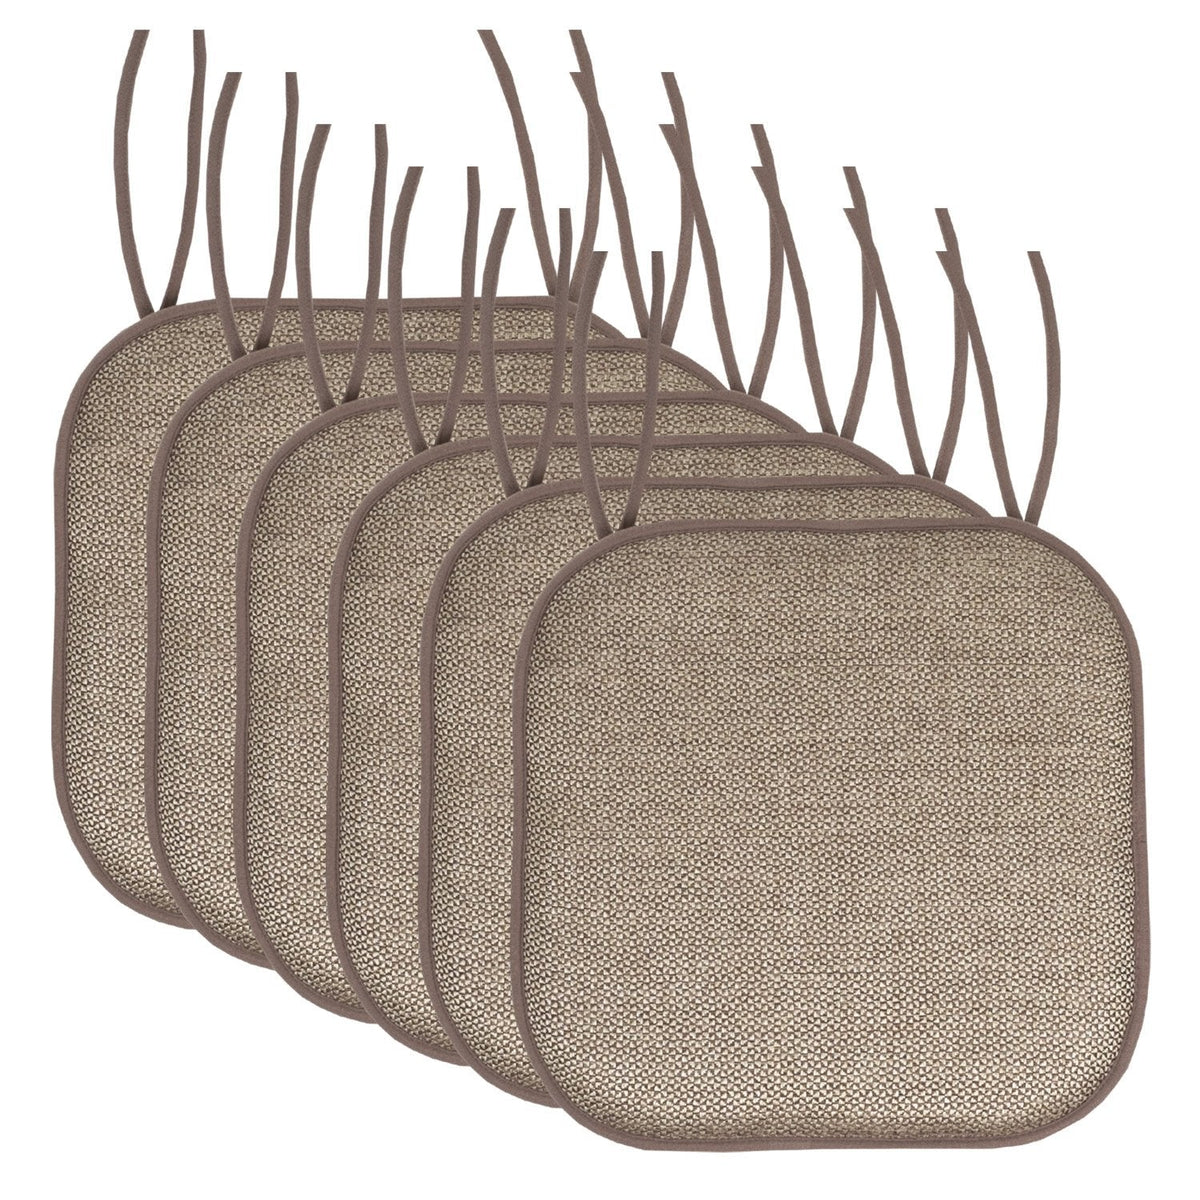 Cameron Chair Cushion Set with Ties Beige Brown 6-Pack